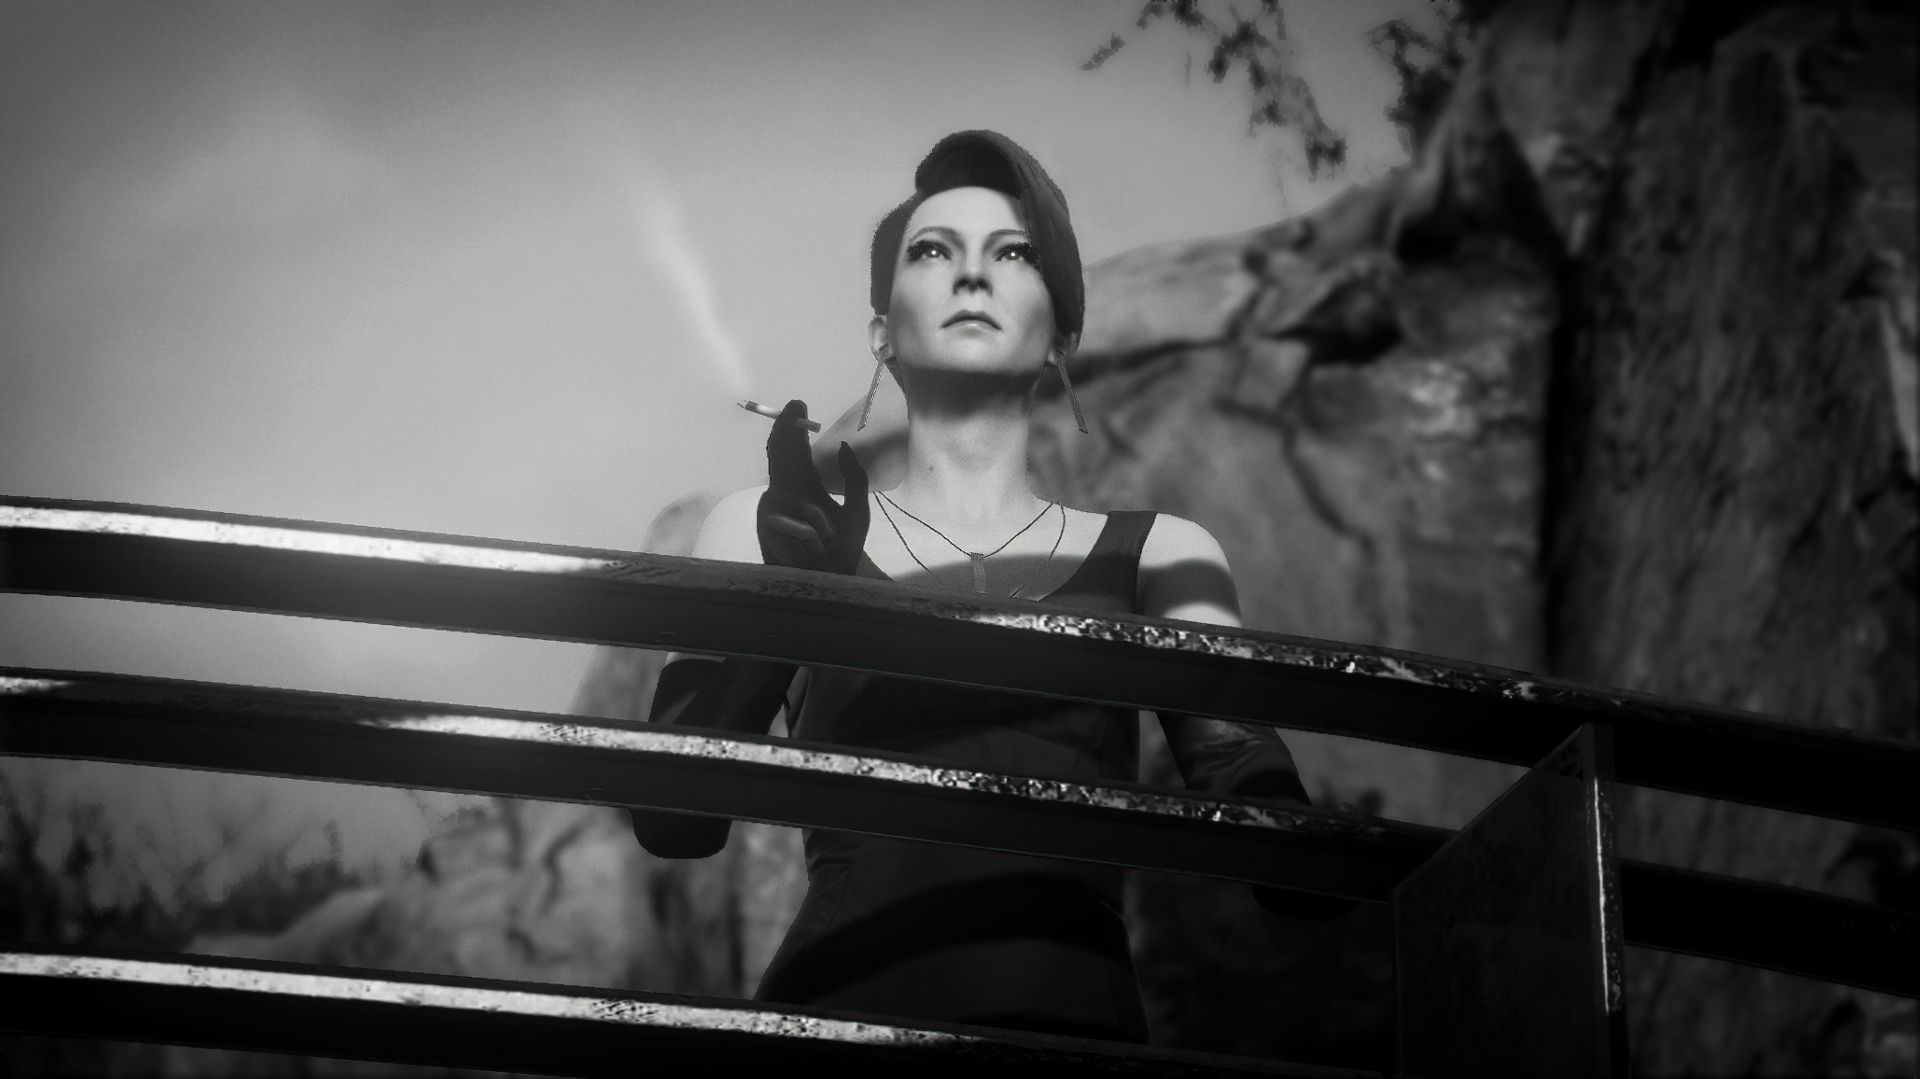 Hitman 3 Hitman Diana Burnwood Smoking Necklace Monochrome Video Games Looking Into The Distance Dre 1920x1079